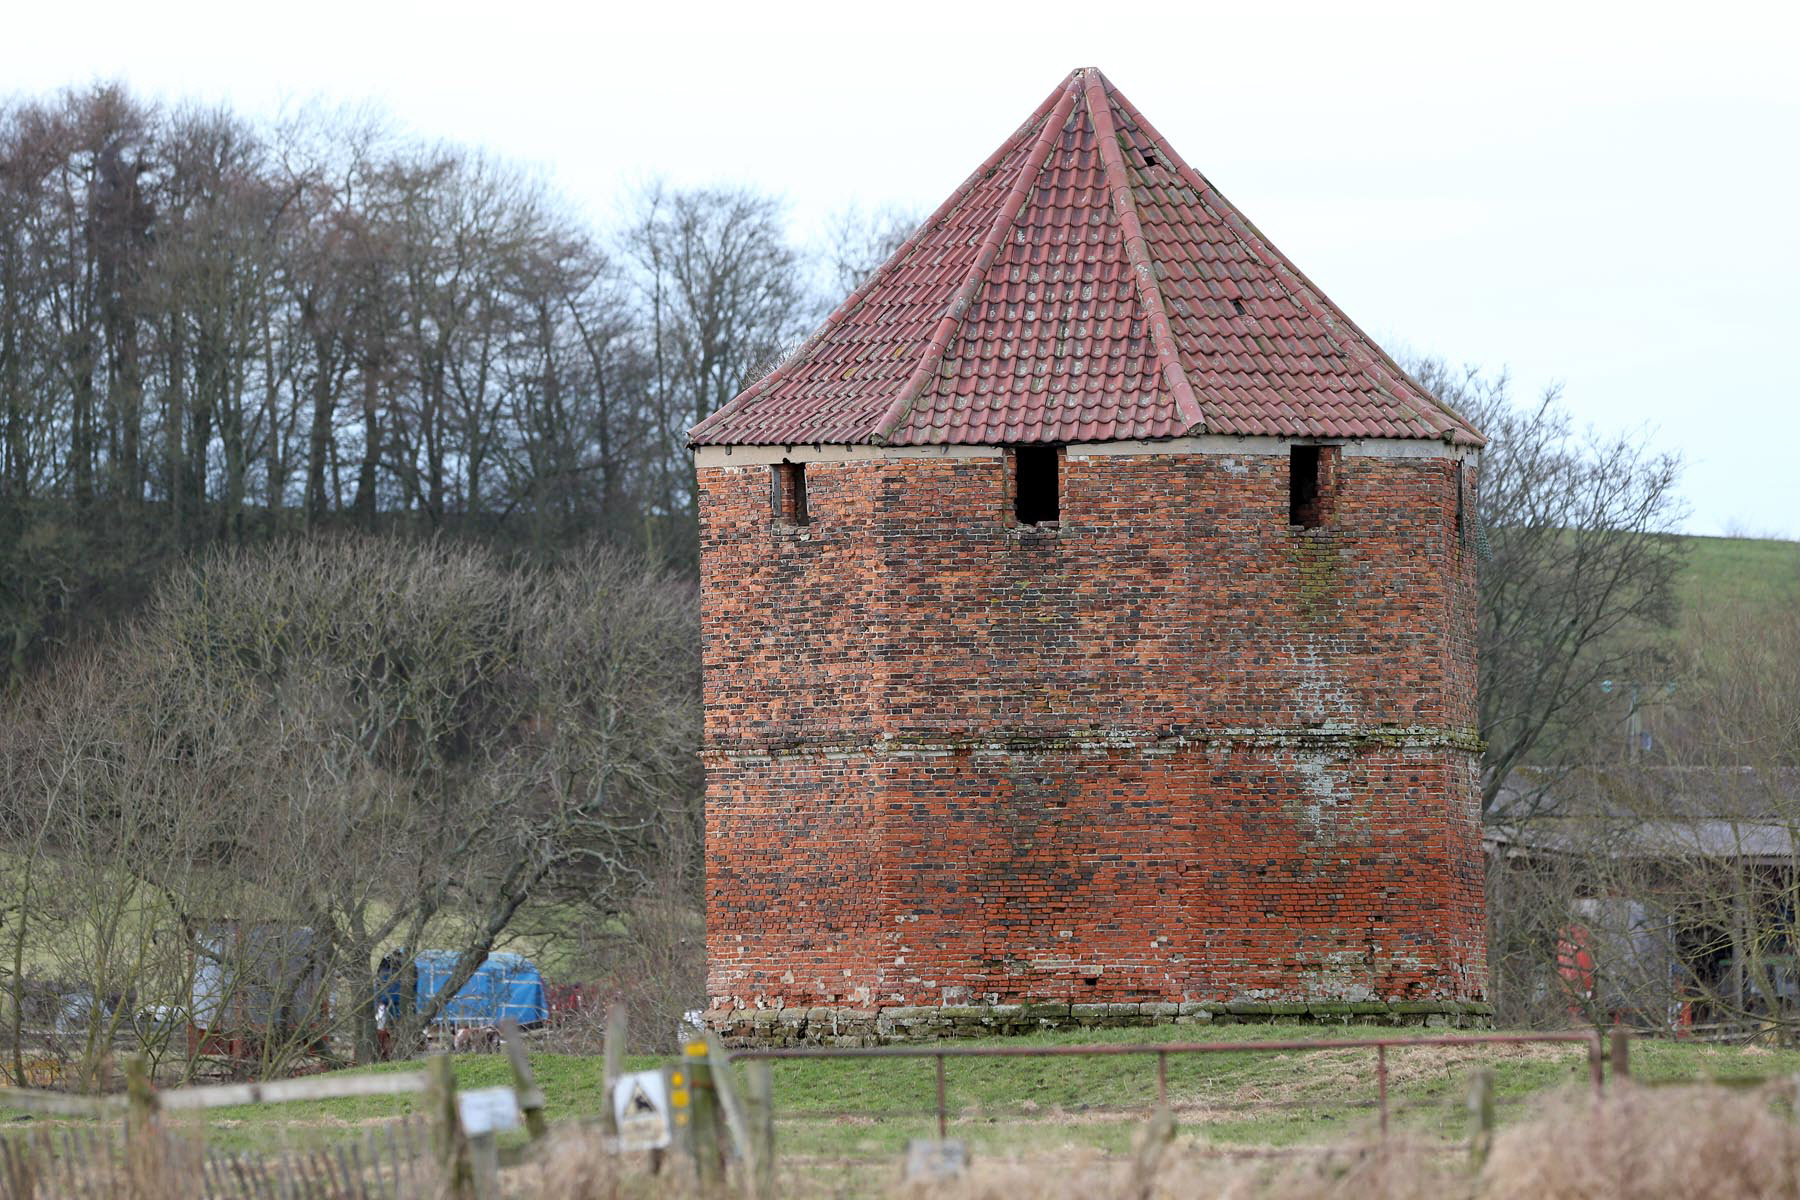 The dovecote at Low Middleton Hall, near Middleton One Row, which had planning permission to turn it into a residence